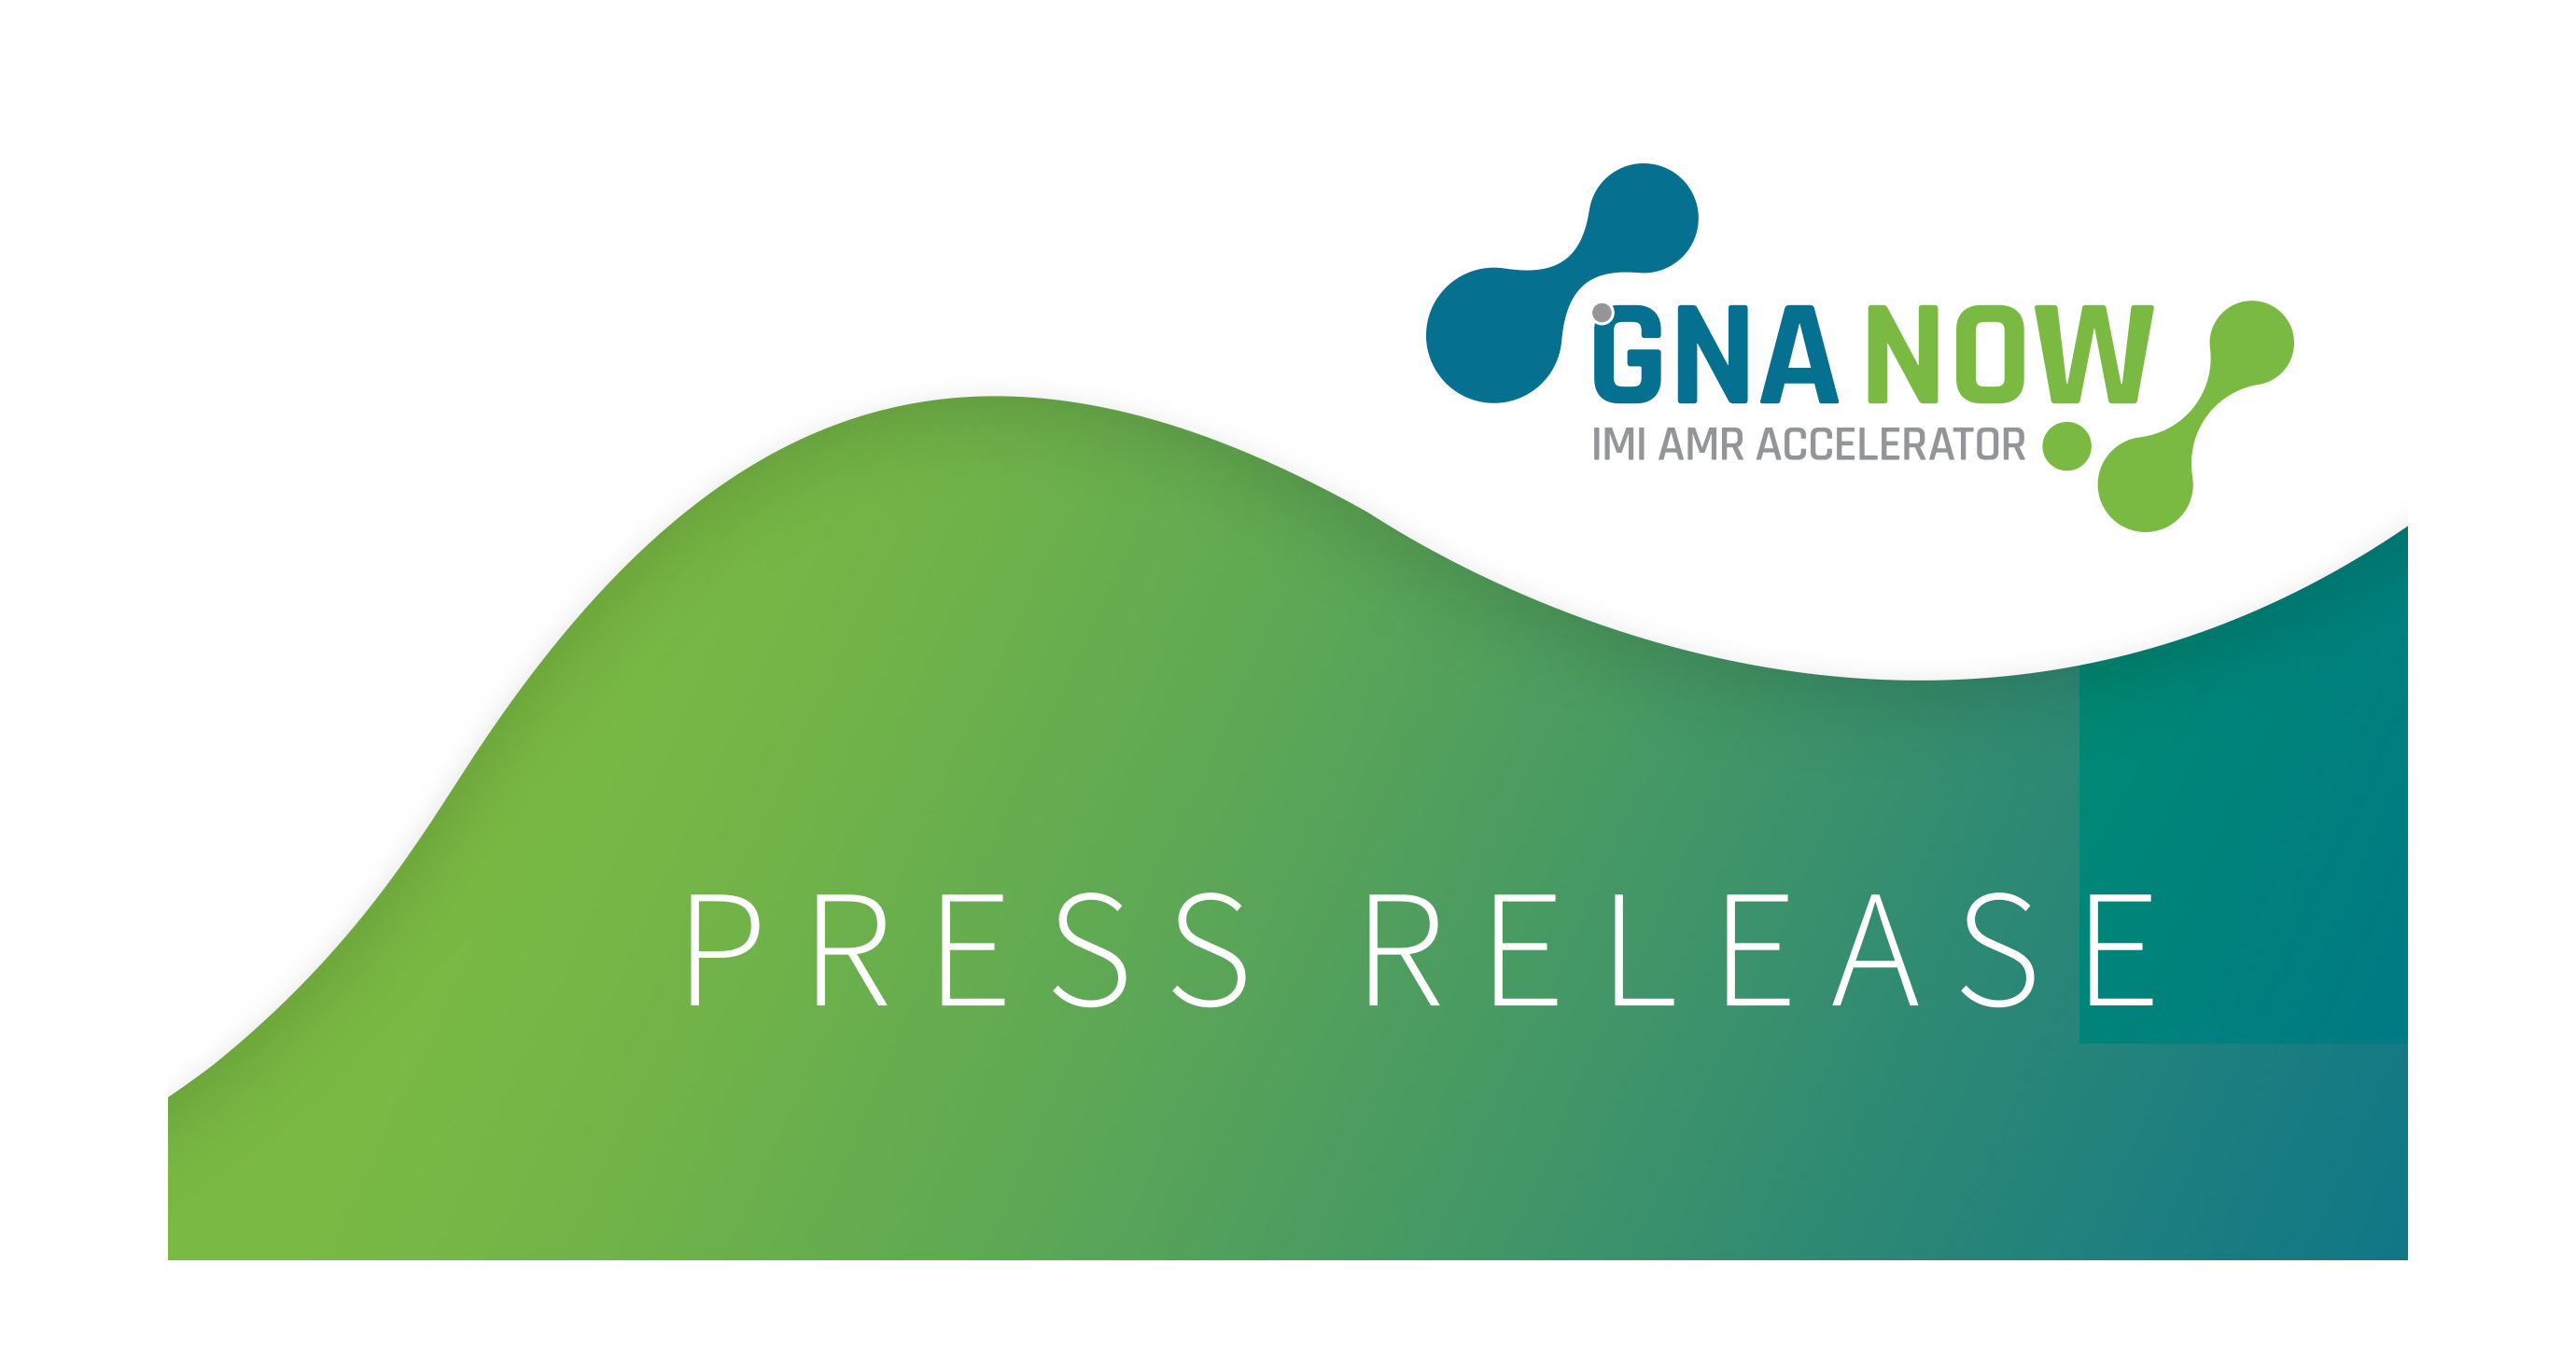 Press release - GNA NOW